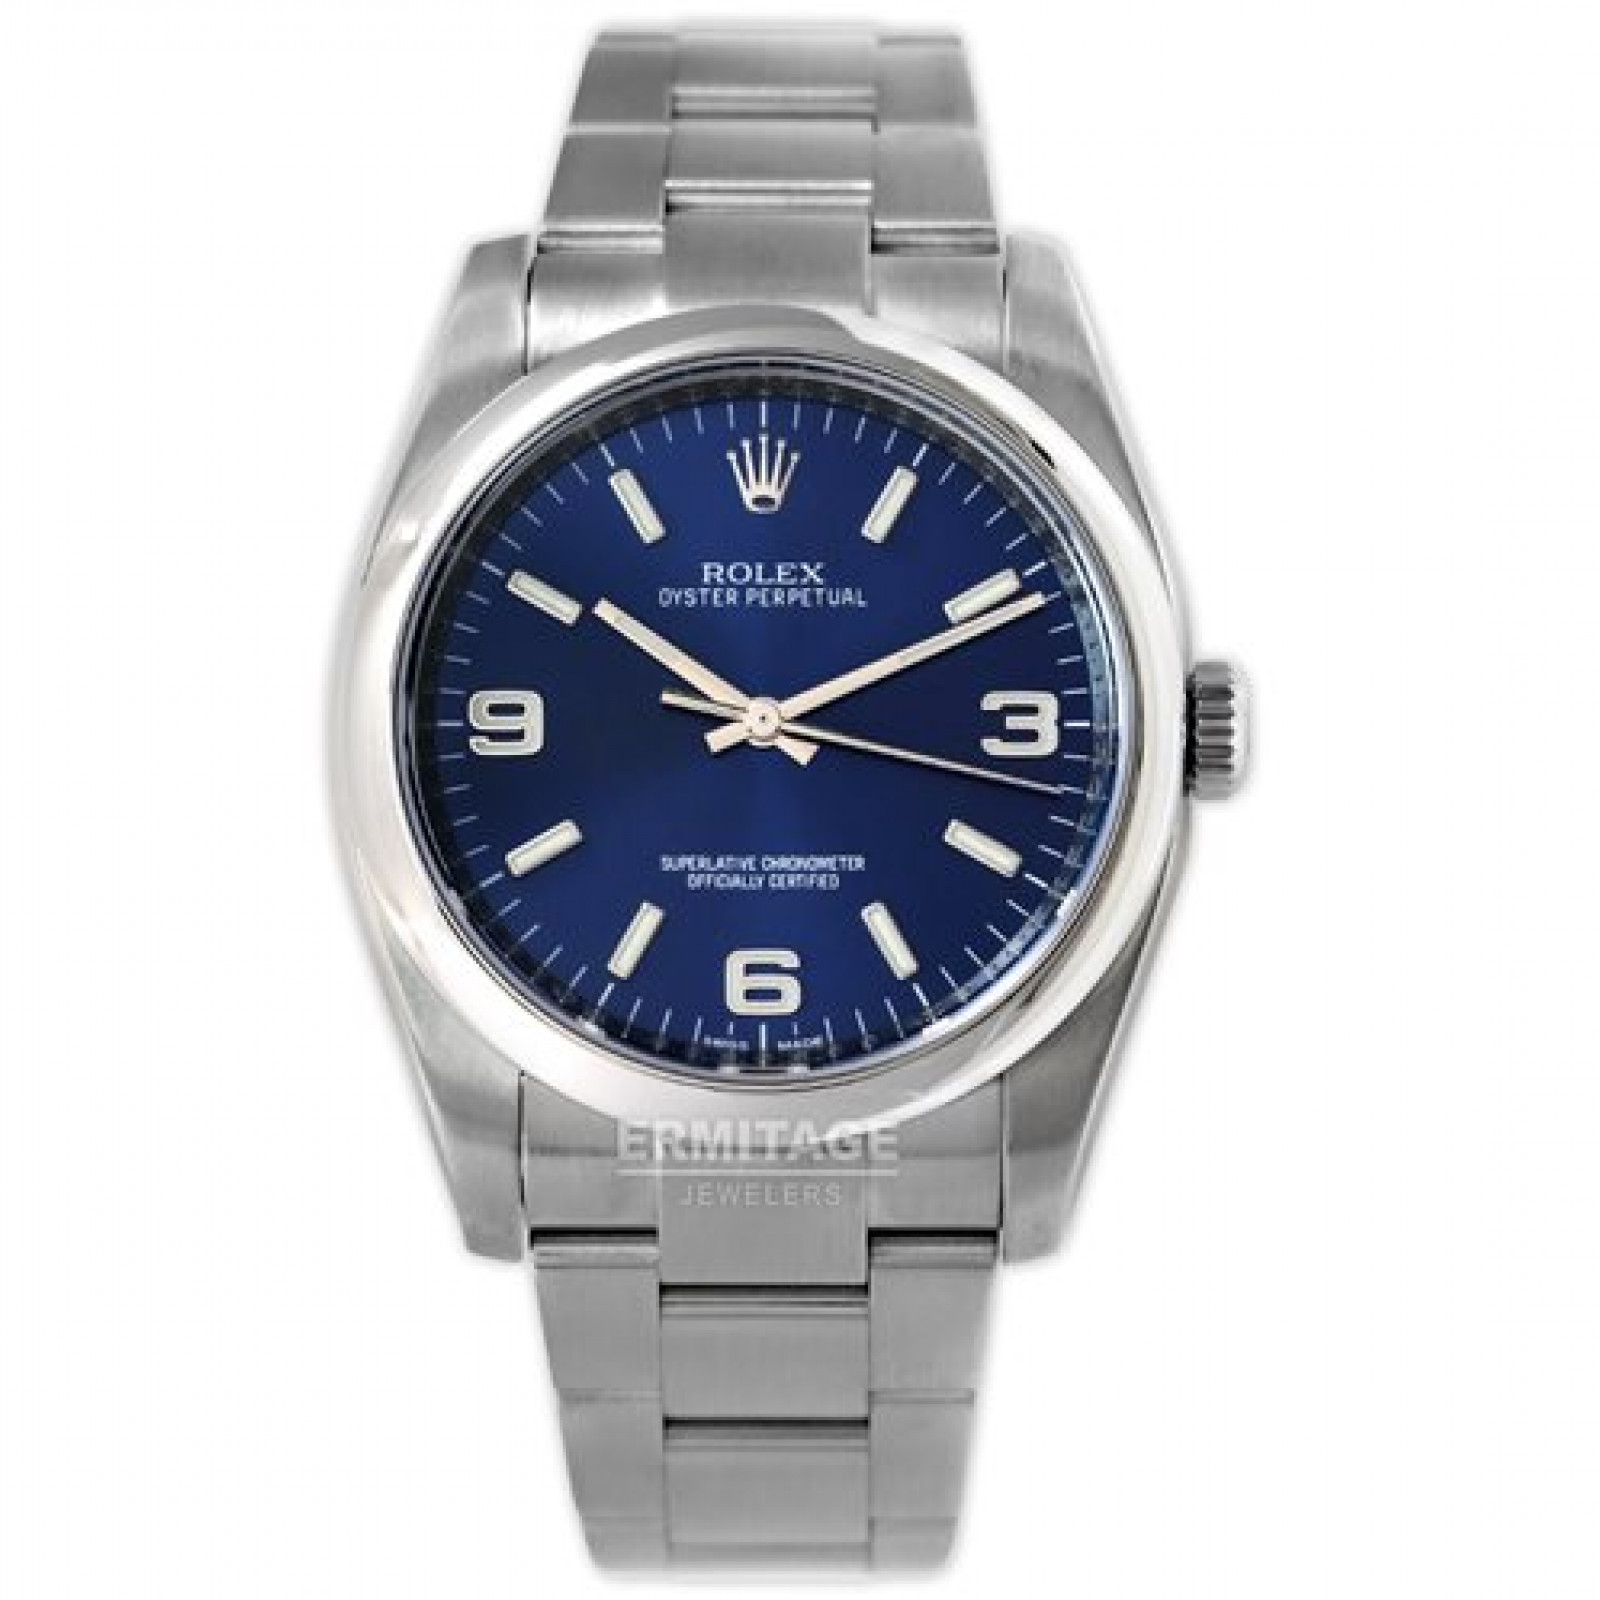 2015 Blue Rolex Oyster Perpetual Ref. 116000